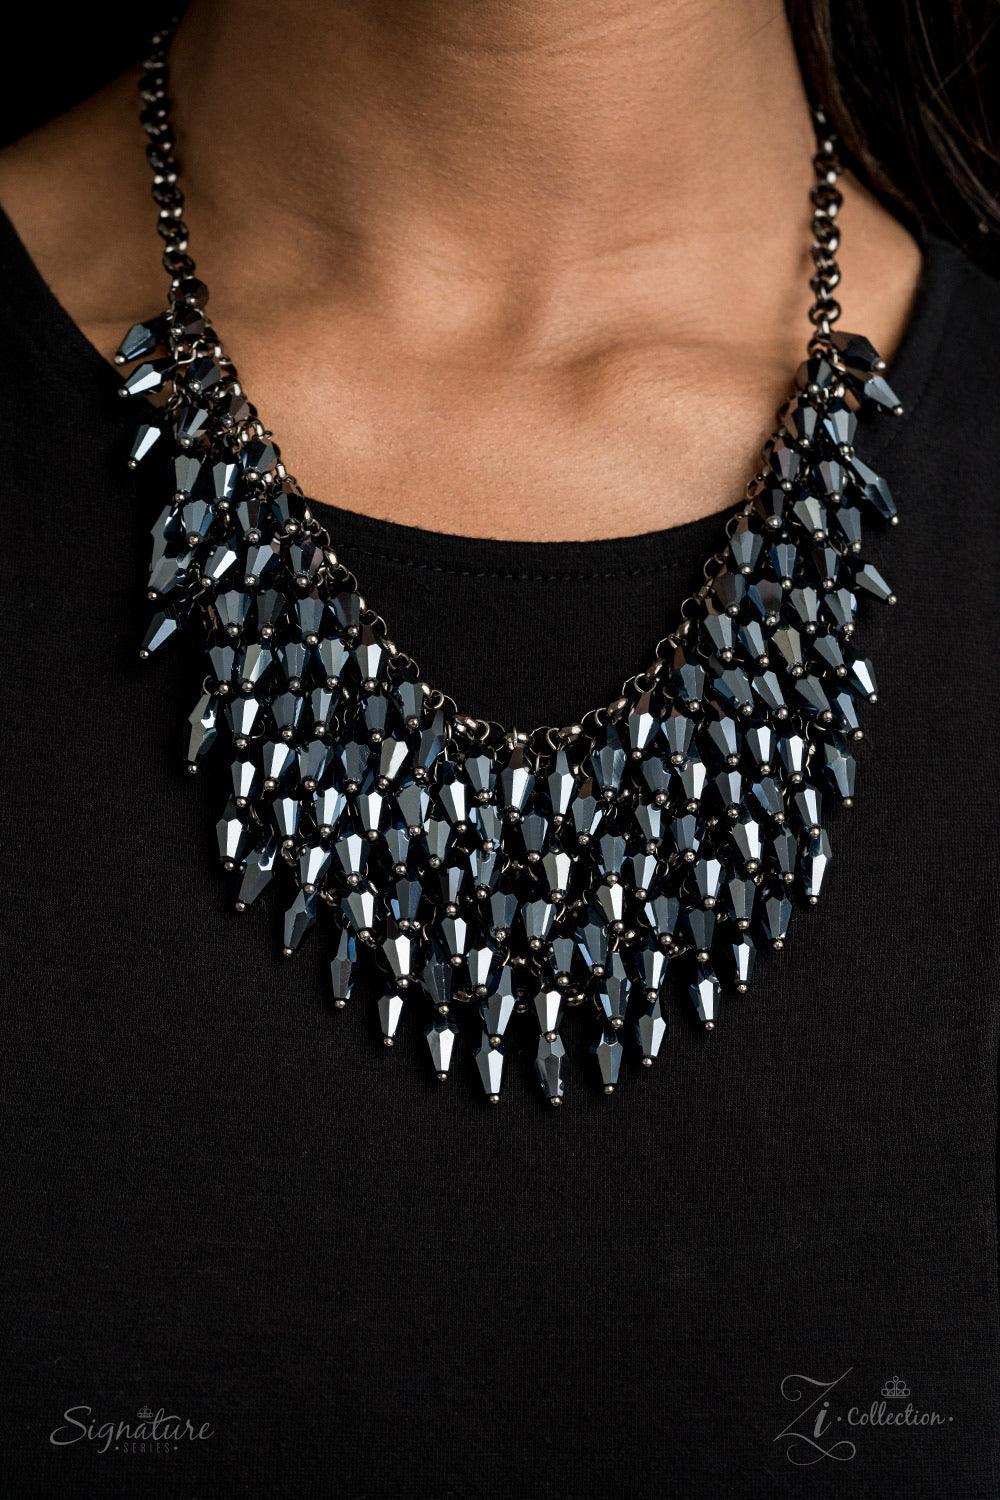 Paparazzi Accessories The Heather 💗💗ZiCollection $25💗💗 Row after row of metallic blue beads swing from an edgy net of glistening gunmetal links, layering into an edgy fringe below the collar. Featuring flashy faceted edges, the mesmerizing beads spark